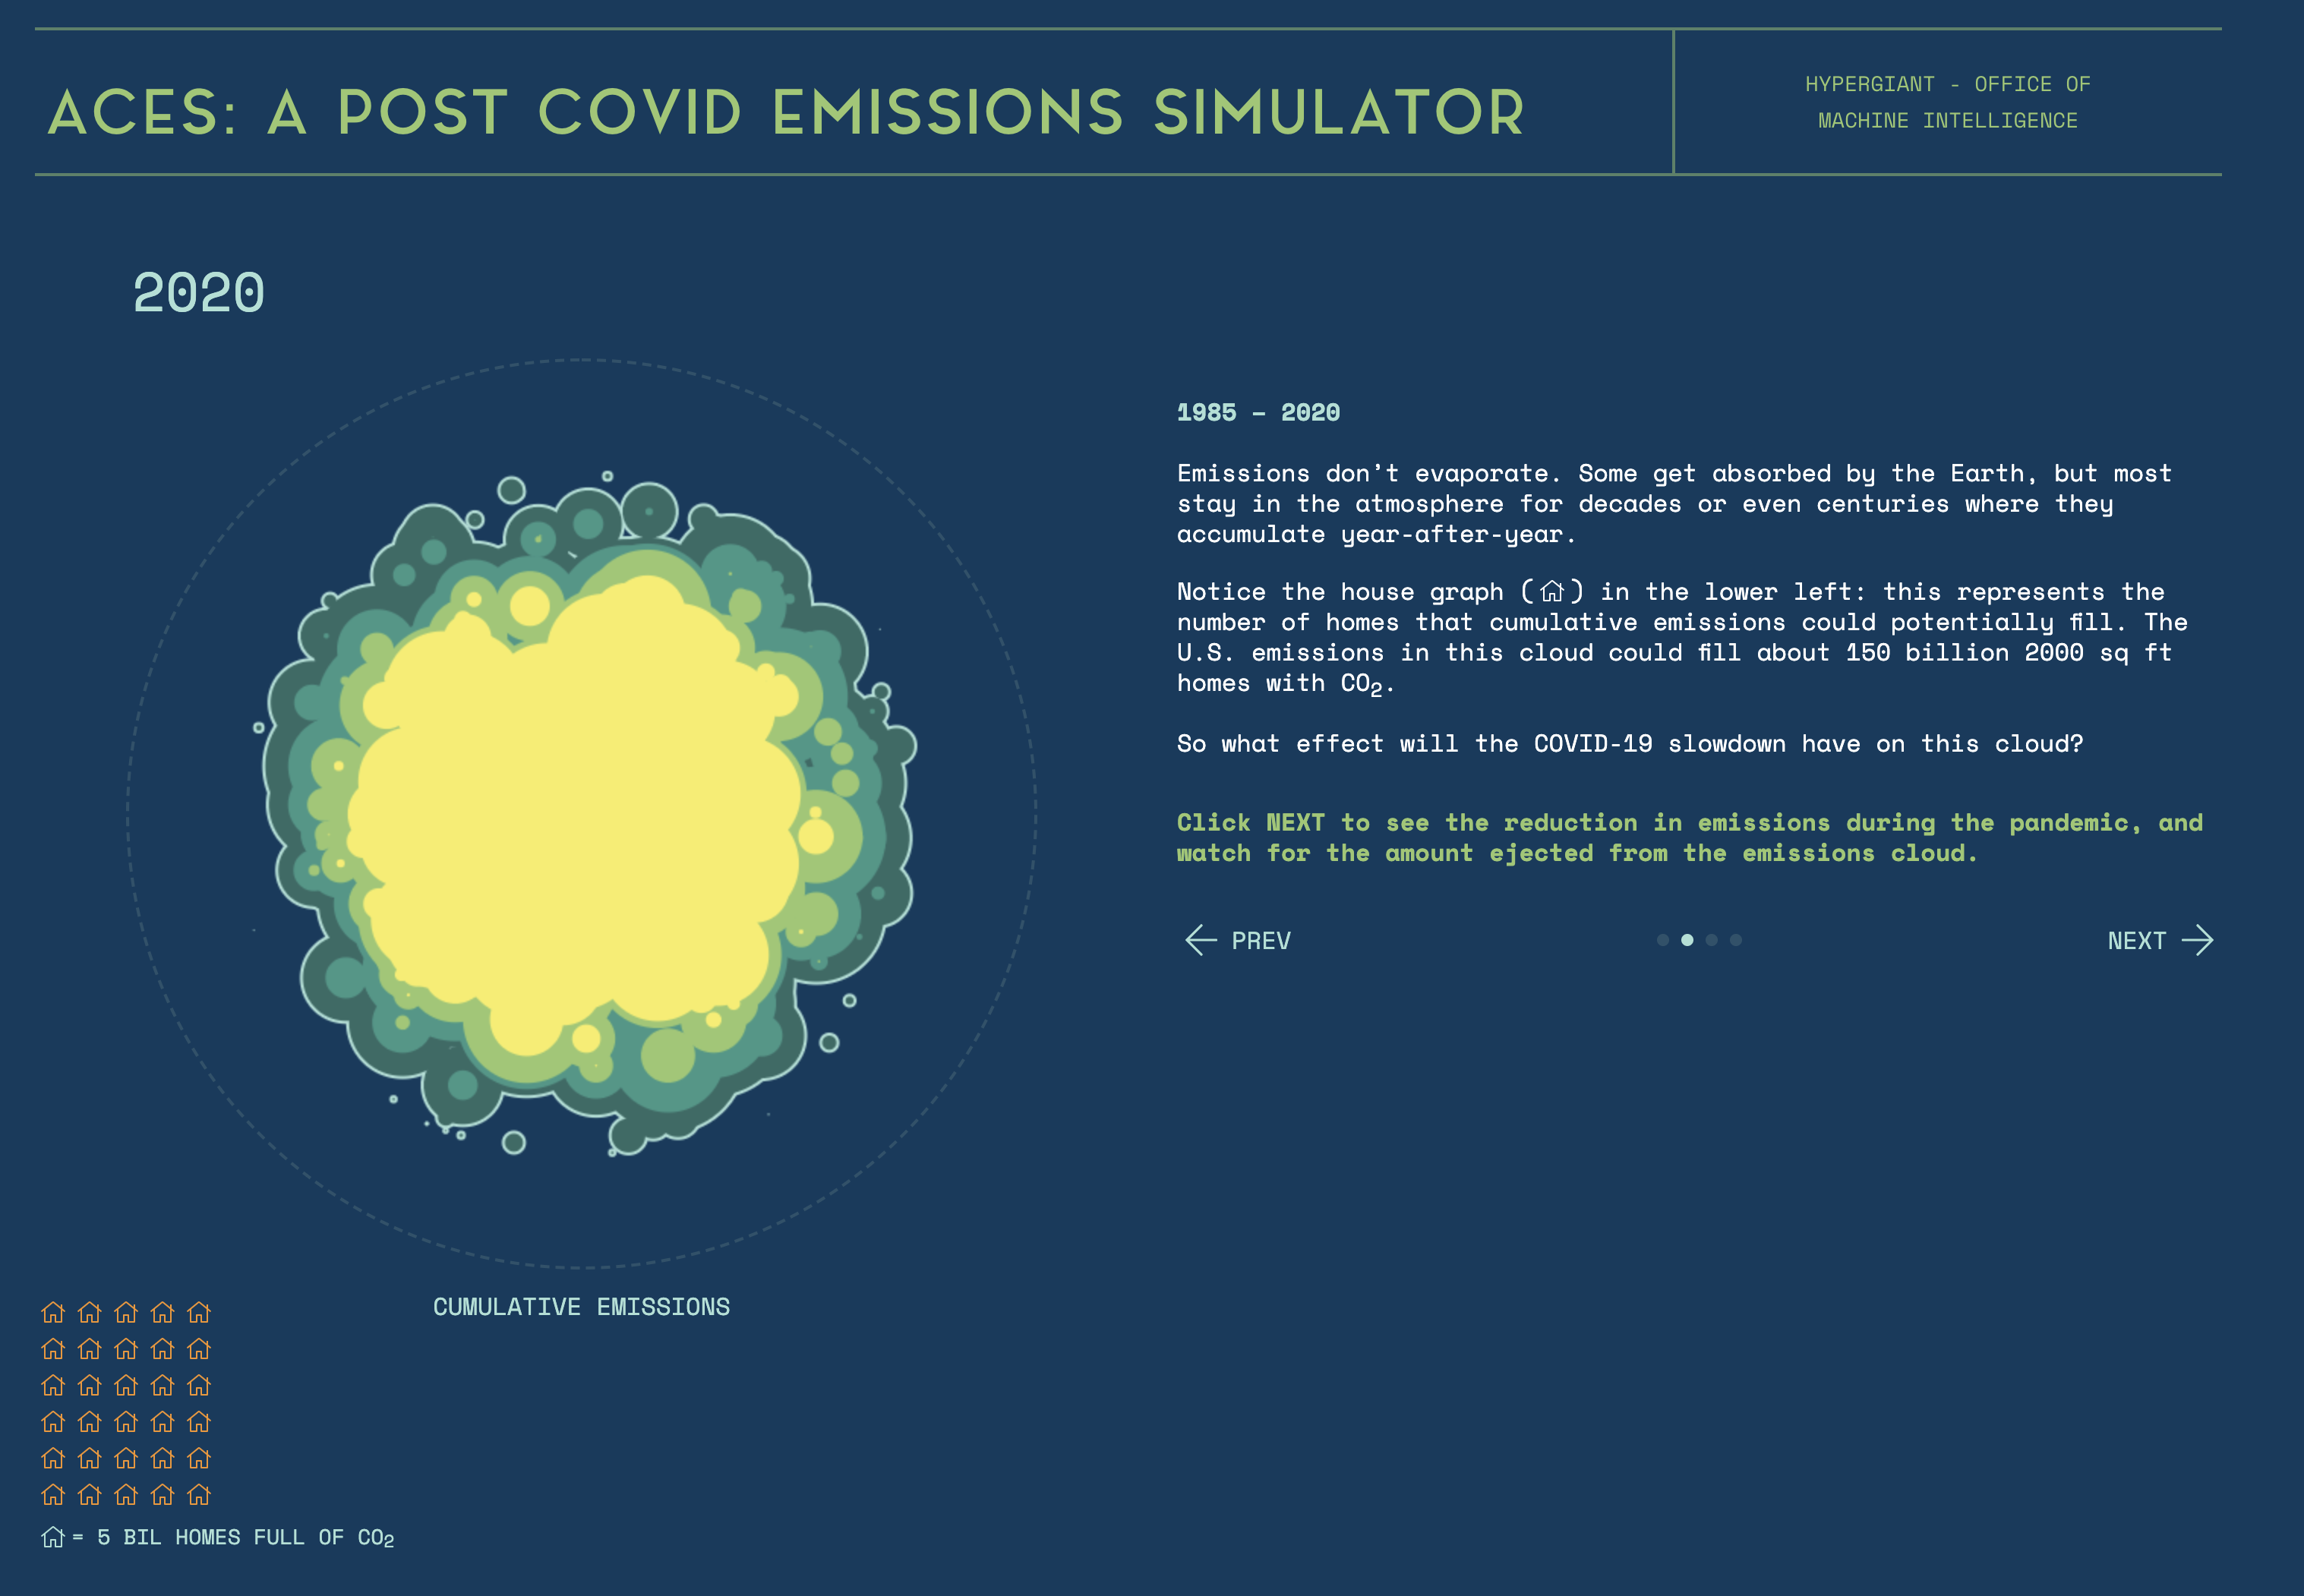 Austin Company Uses AI to Show COVID-19's Climate Change Impact - Built In Austin